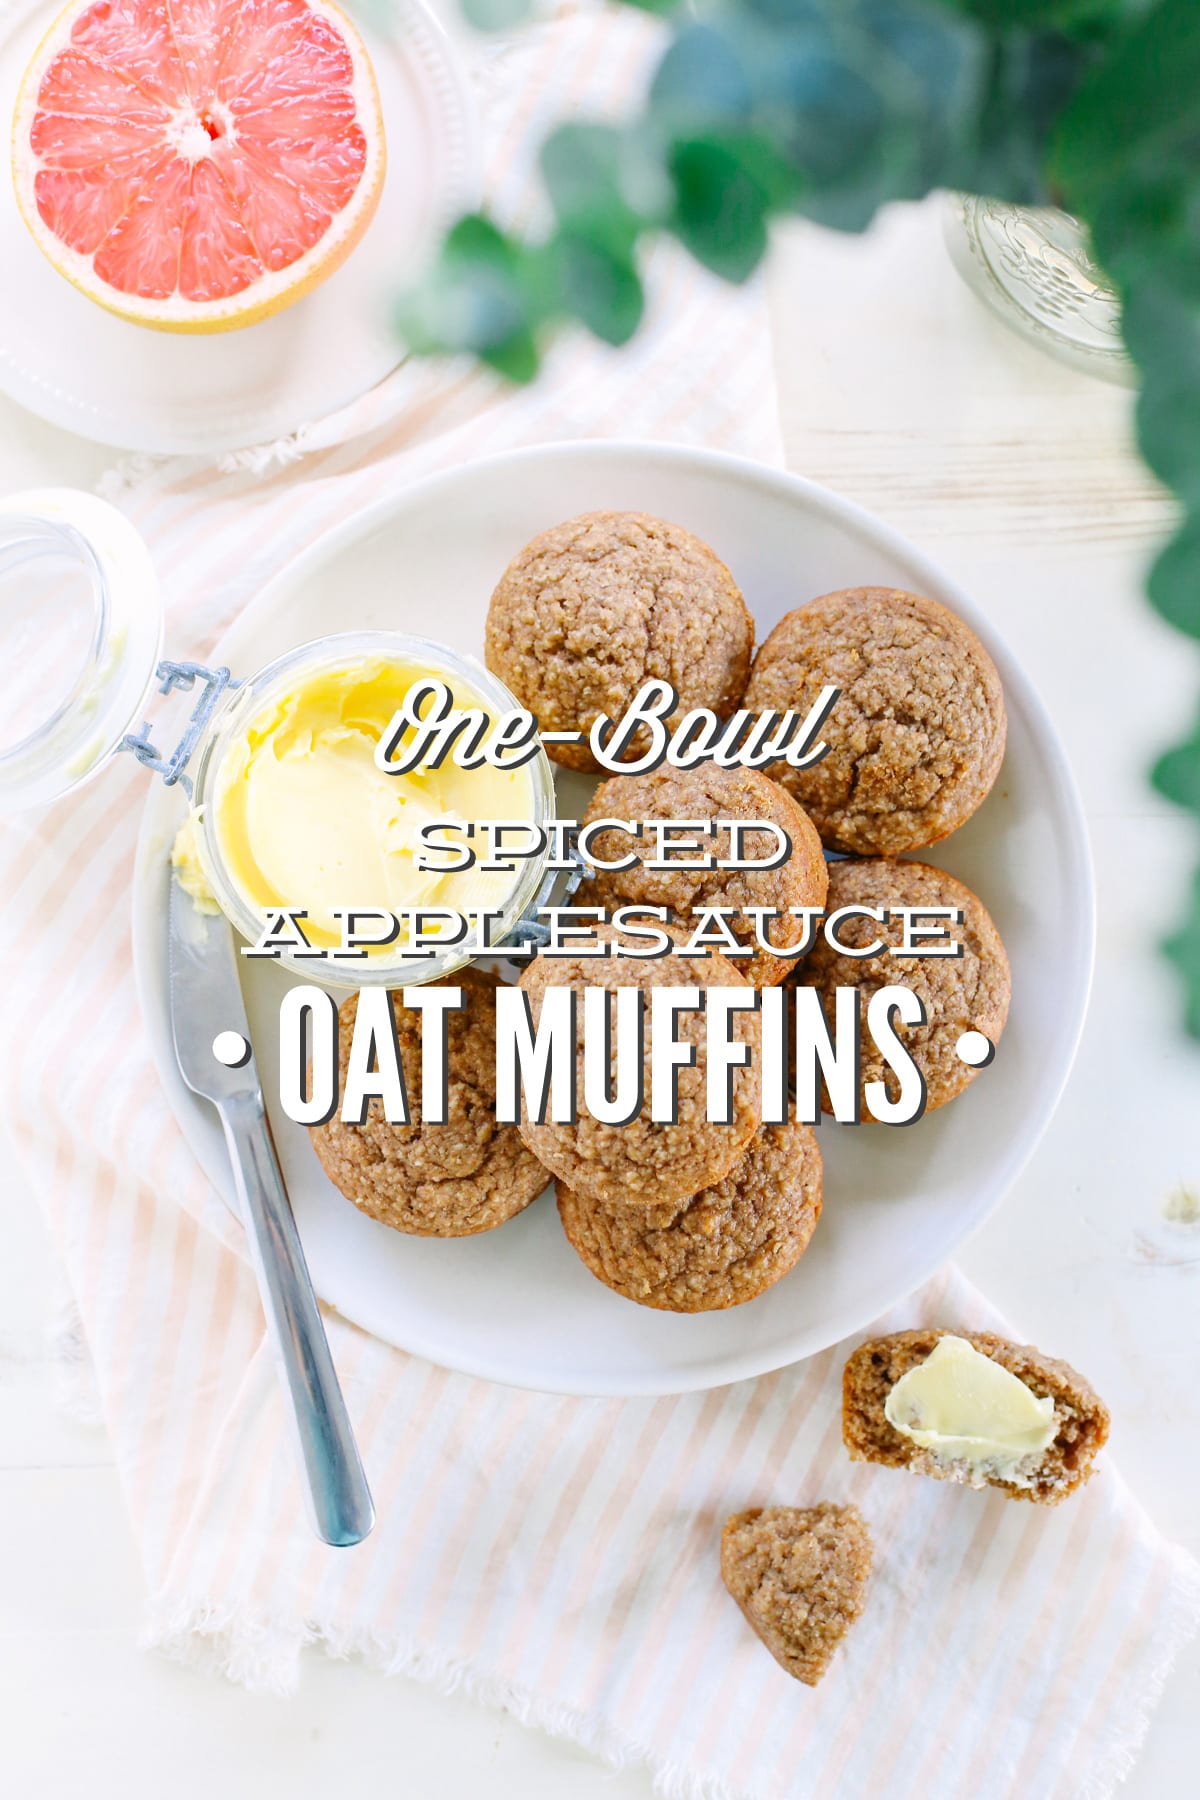 One-Bowl Spiced Applesauce Oat Muffins